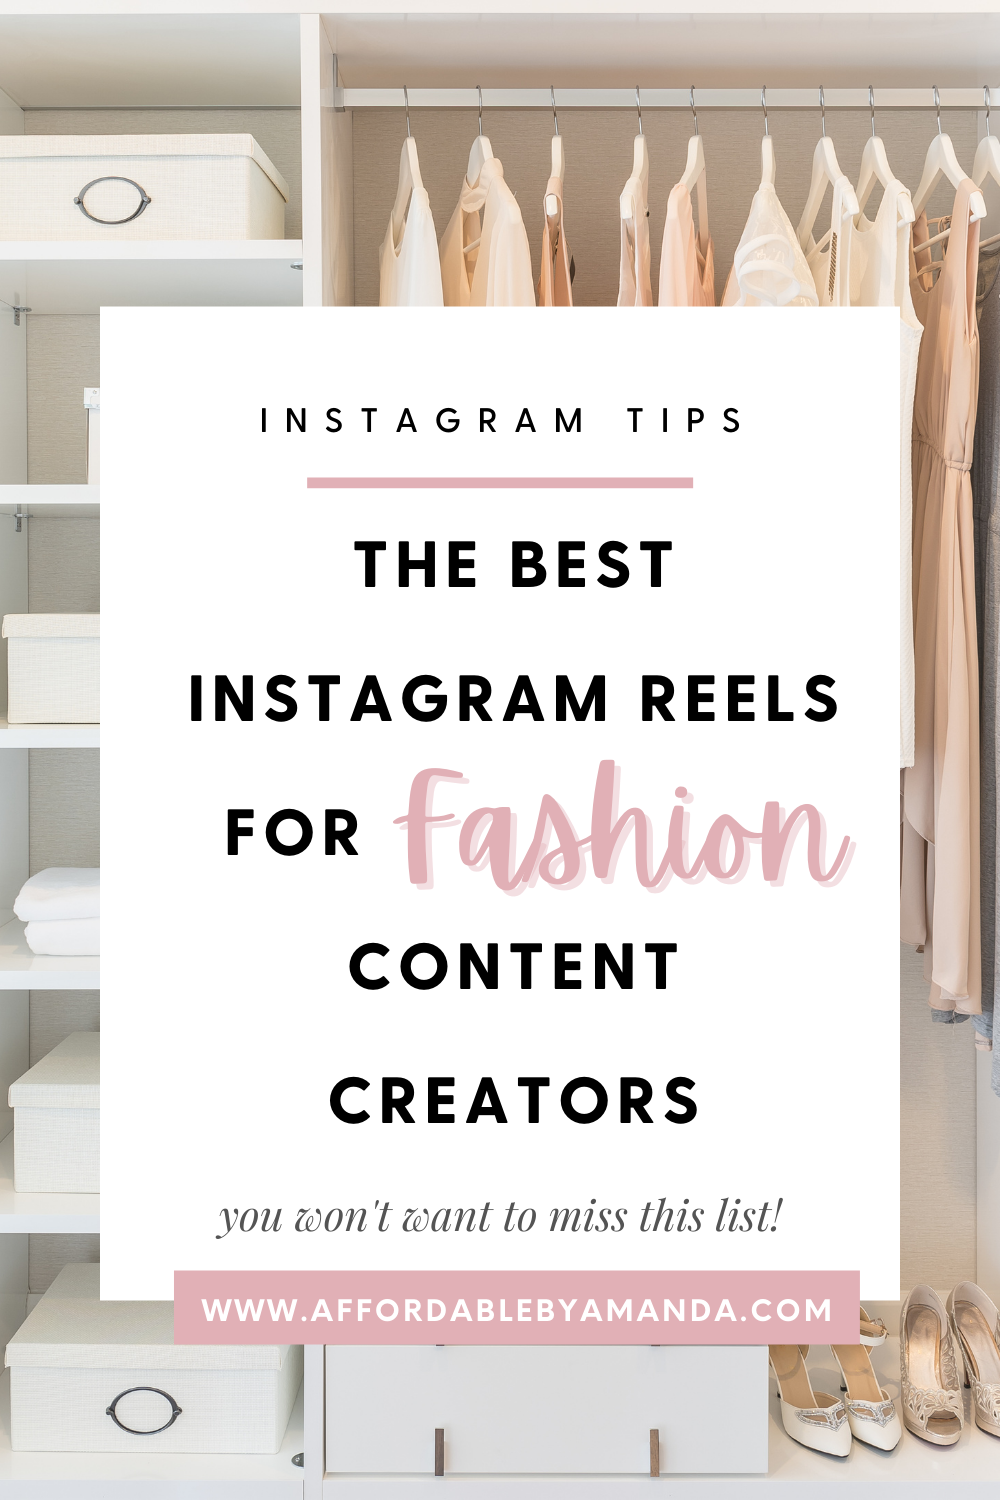 The Best Instagram Reels for Fashion Content Creators